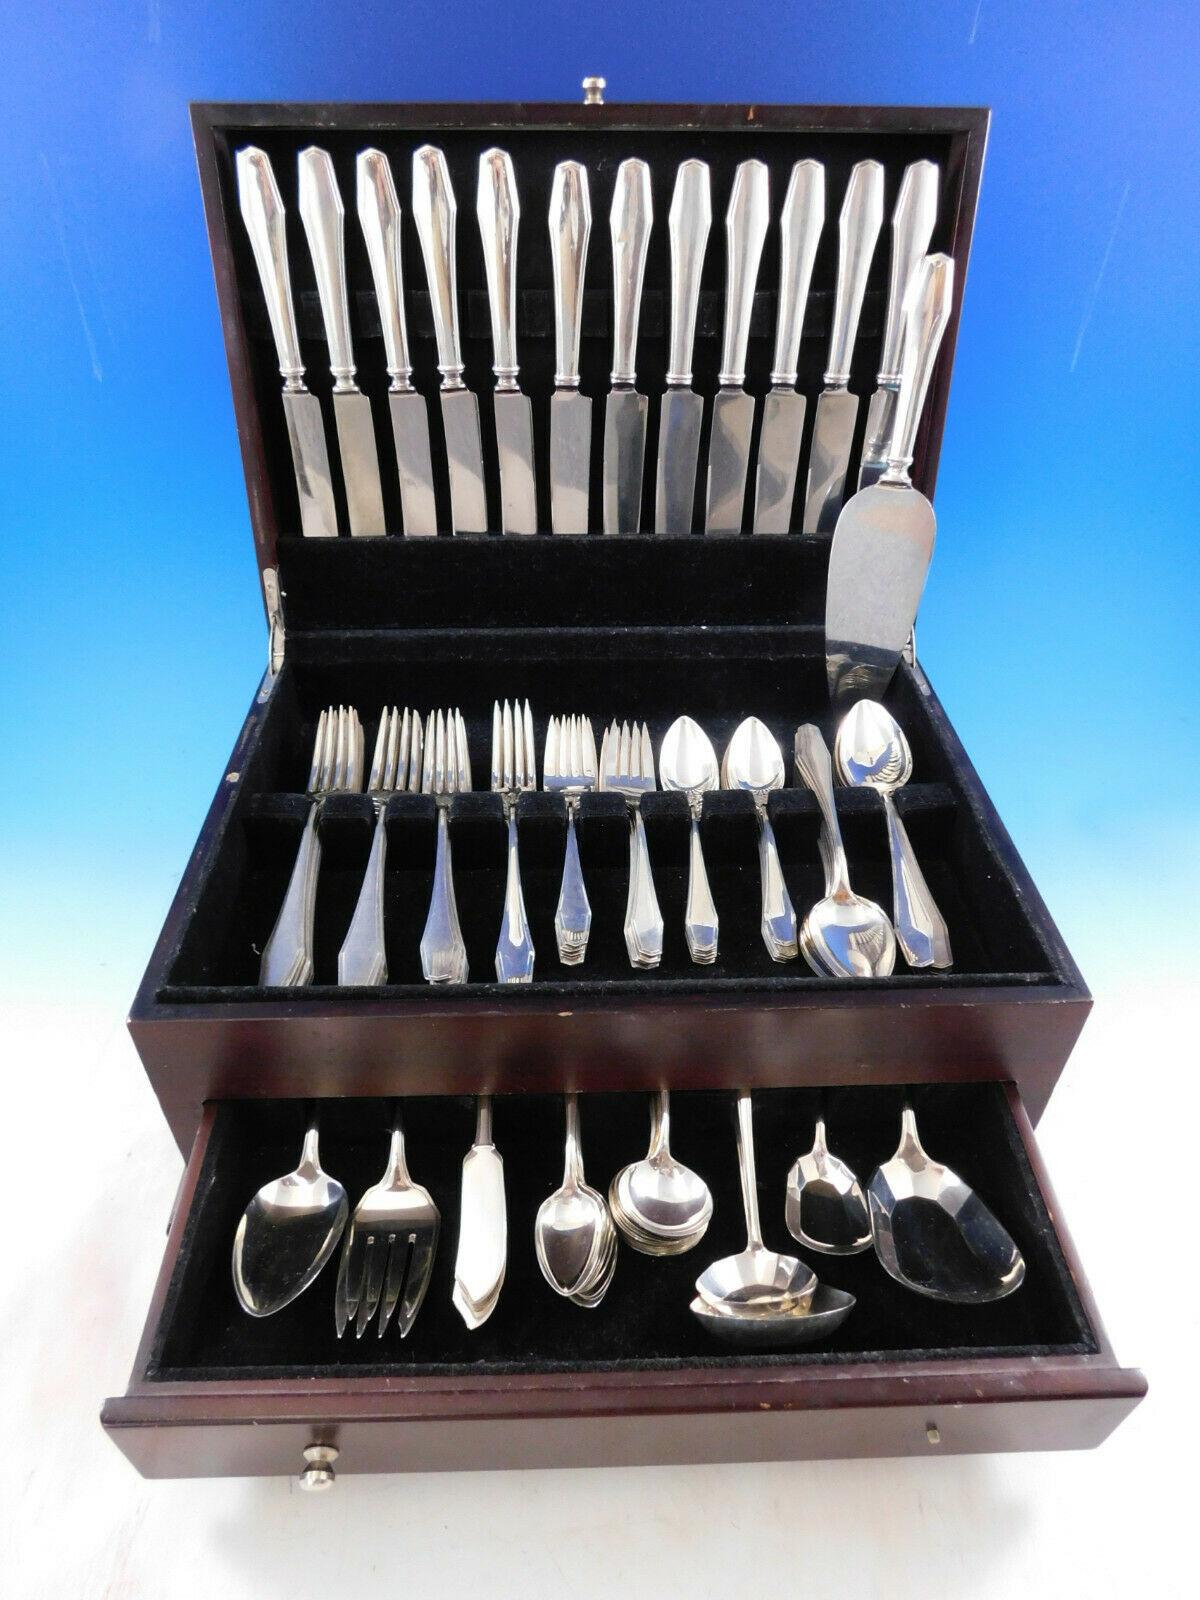 Large dinner size Hampton by Alvin circa 1910 sterling silver flatware set, 116 pieces. This set includes:

12 dinner knives, 9 3/4